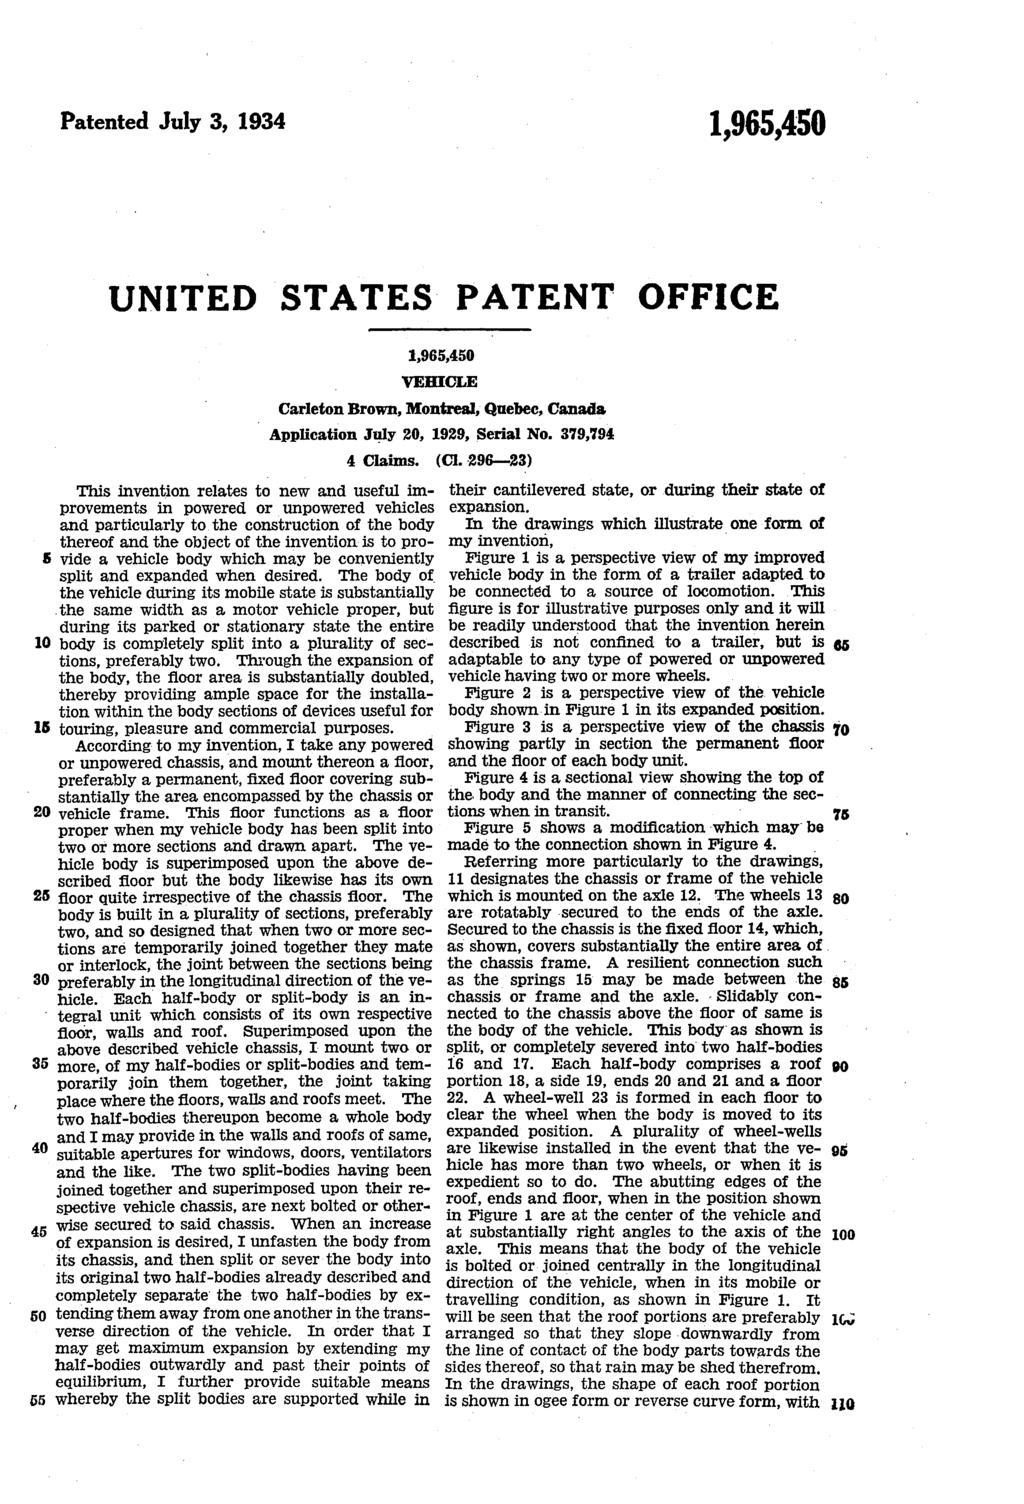 Patented July 3, 1934 UNITED STATES PATENT OFFICE. VEHICLE Carleton Brown, Montreal, Quebec, Canada I Application July 20, 1929, Serial No. 379,794 4 Claims. (Cl. 296-23.